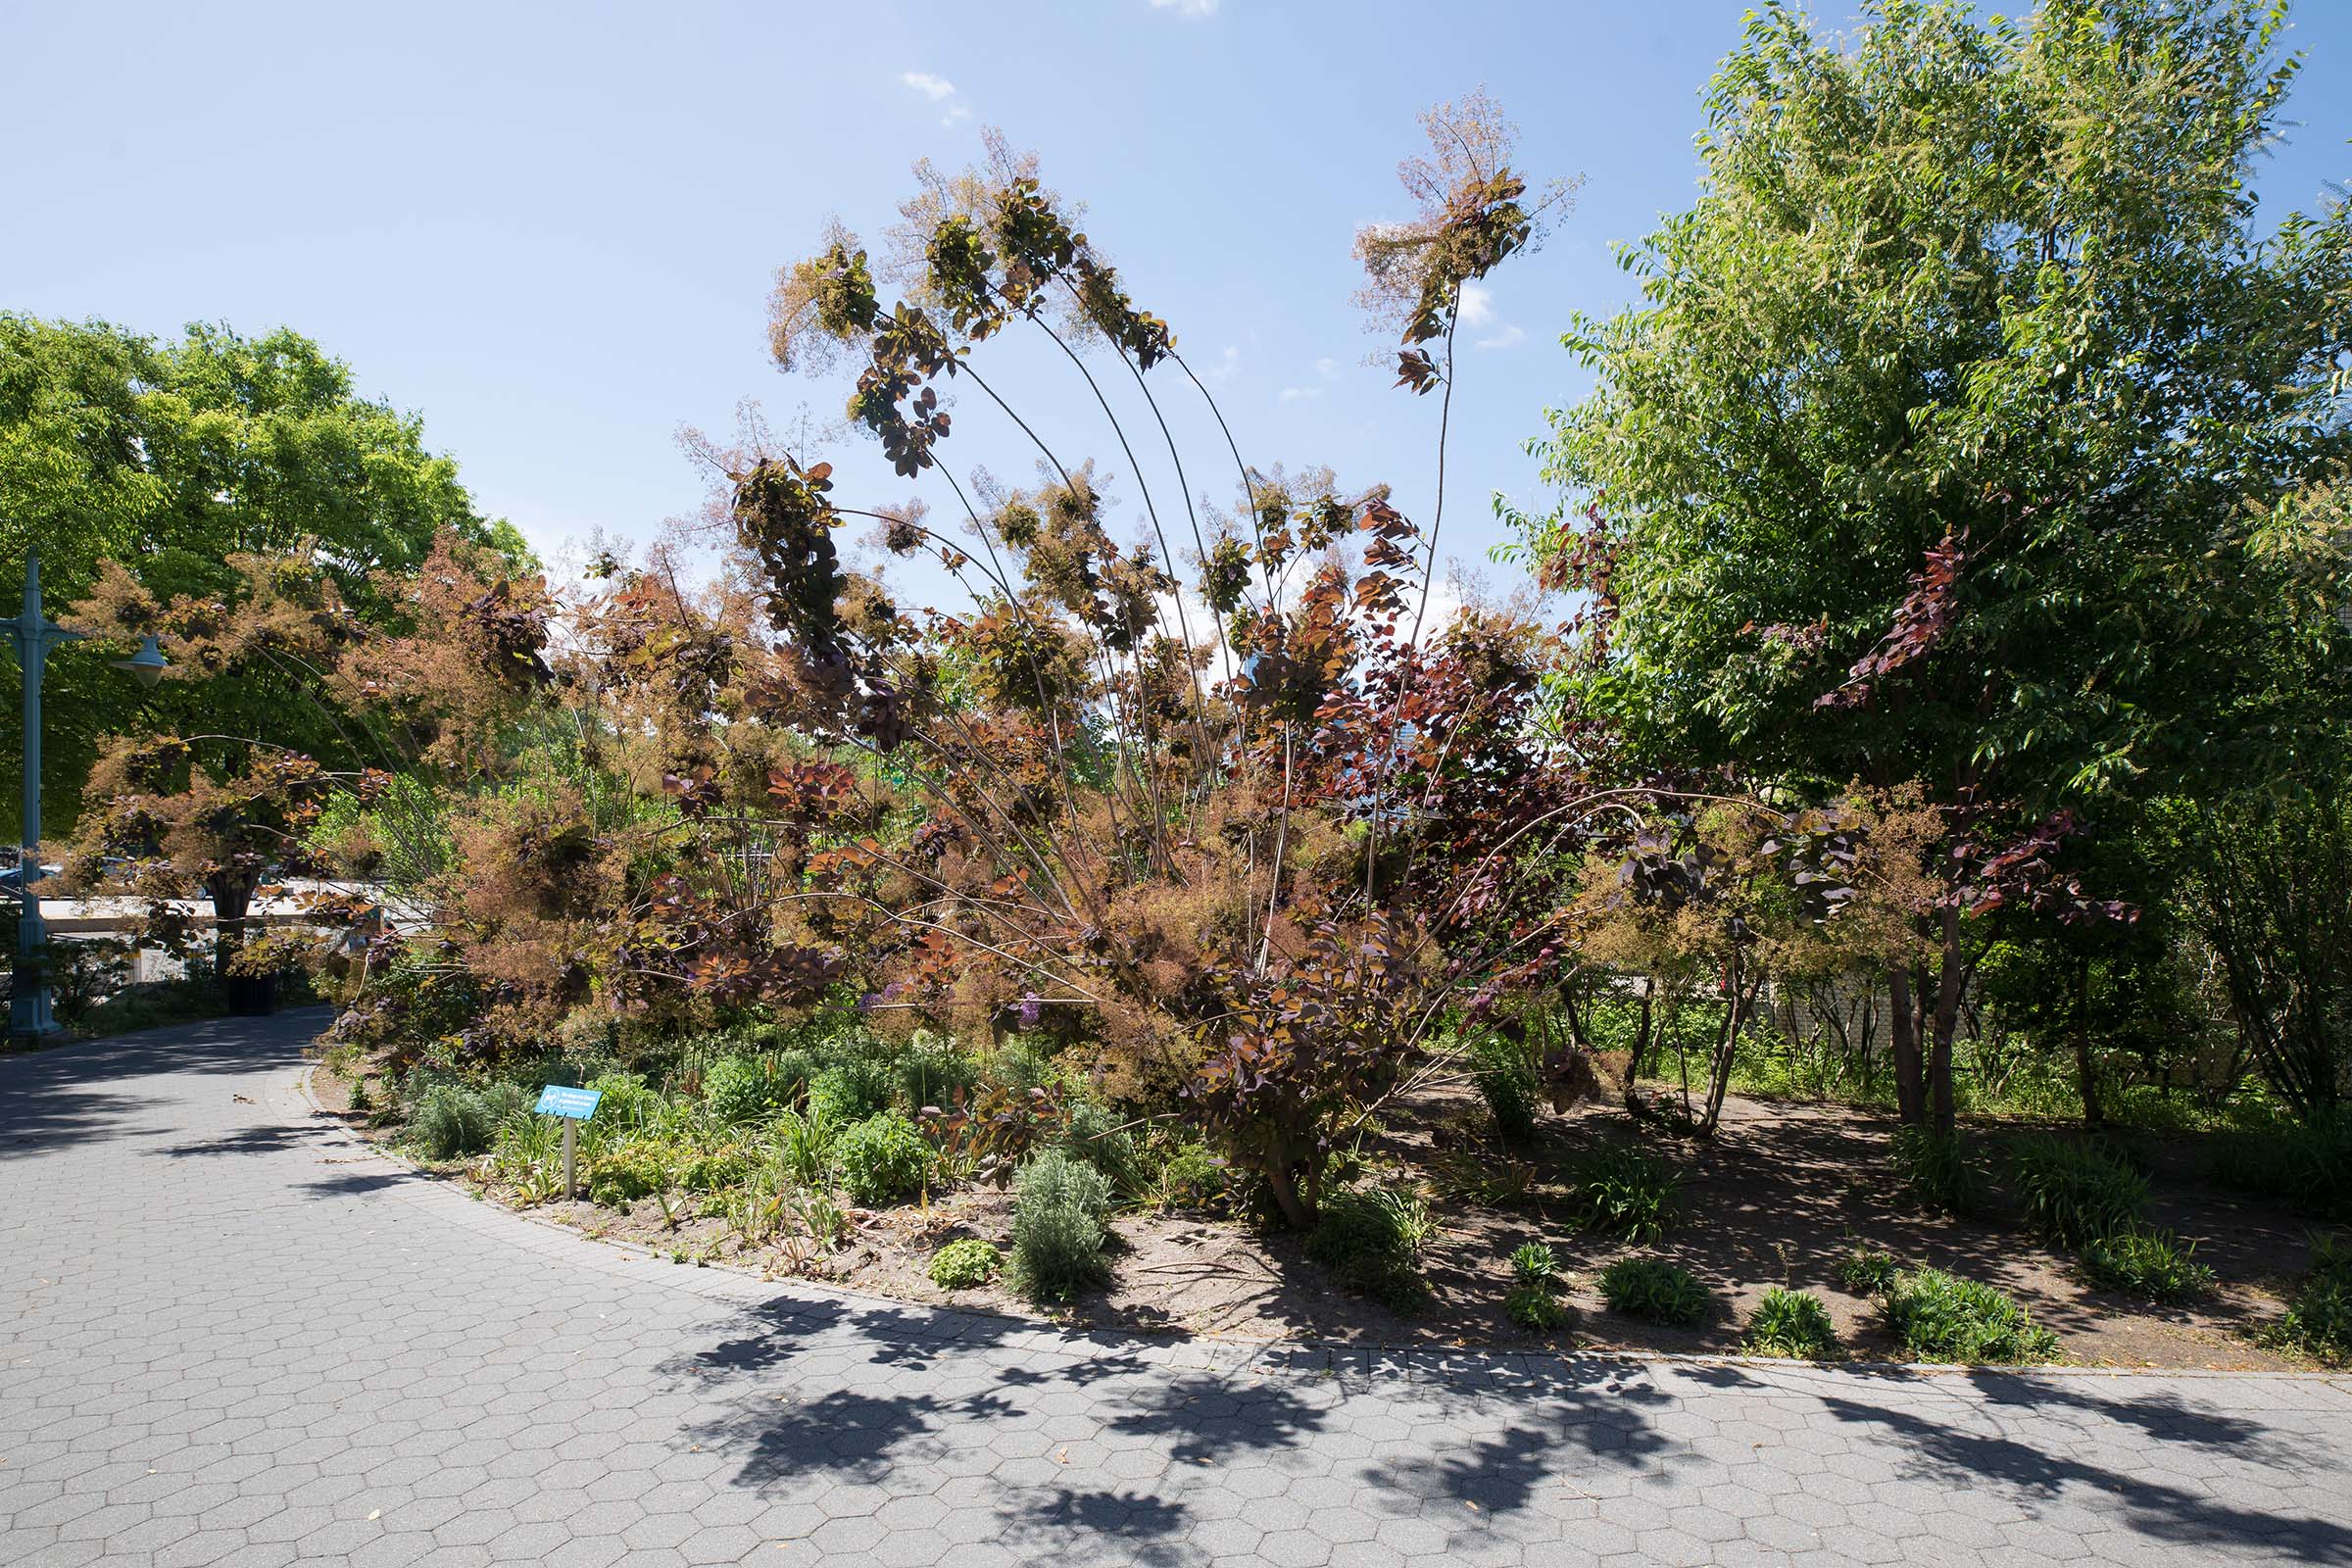 The smoketree's branches dangle over the path in Hudson River Park